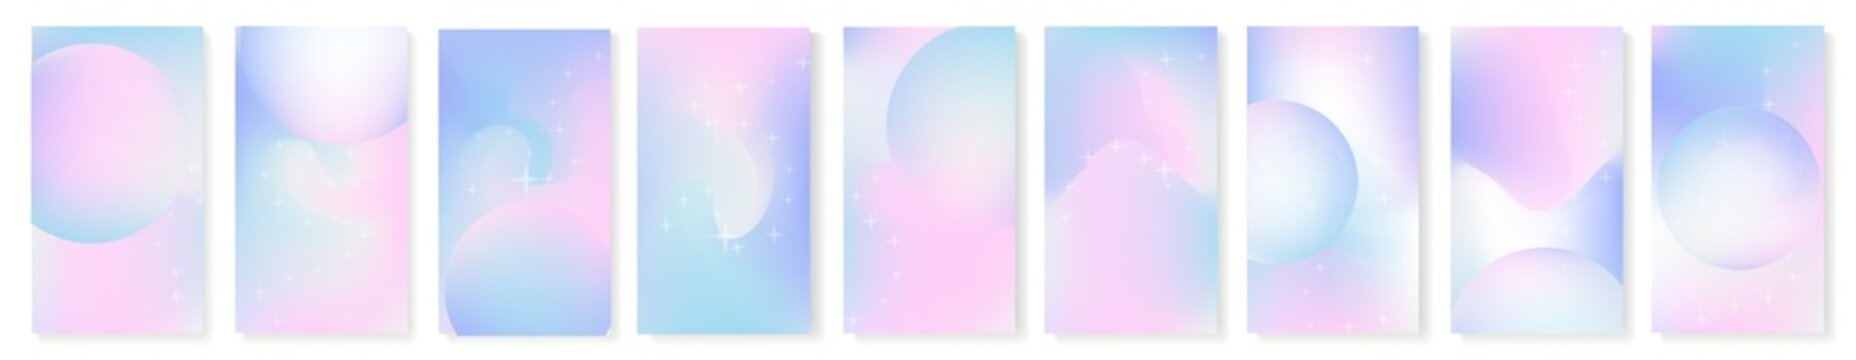 Unicorn fairy holographic gradient or 3d galaxy pastel vector background. Fantasy princess magic poster. Aesthetic pearlescent abstract illustration with soft fluid sphere. Futuristic blurry backdrop